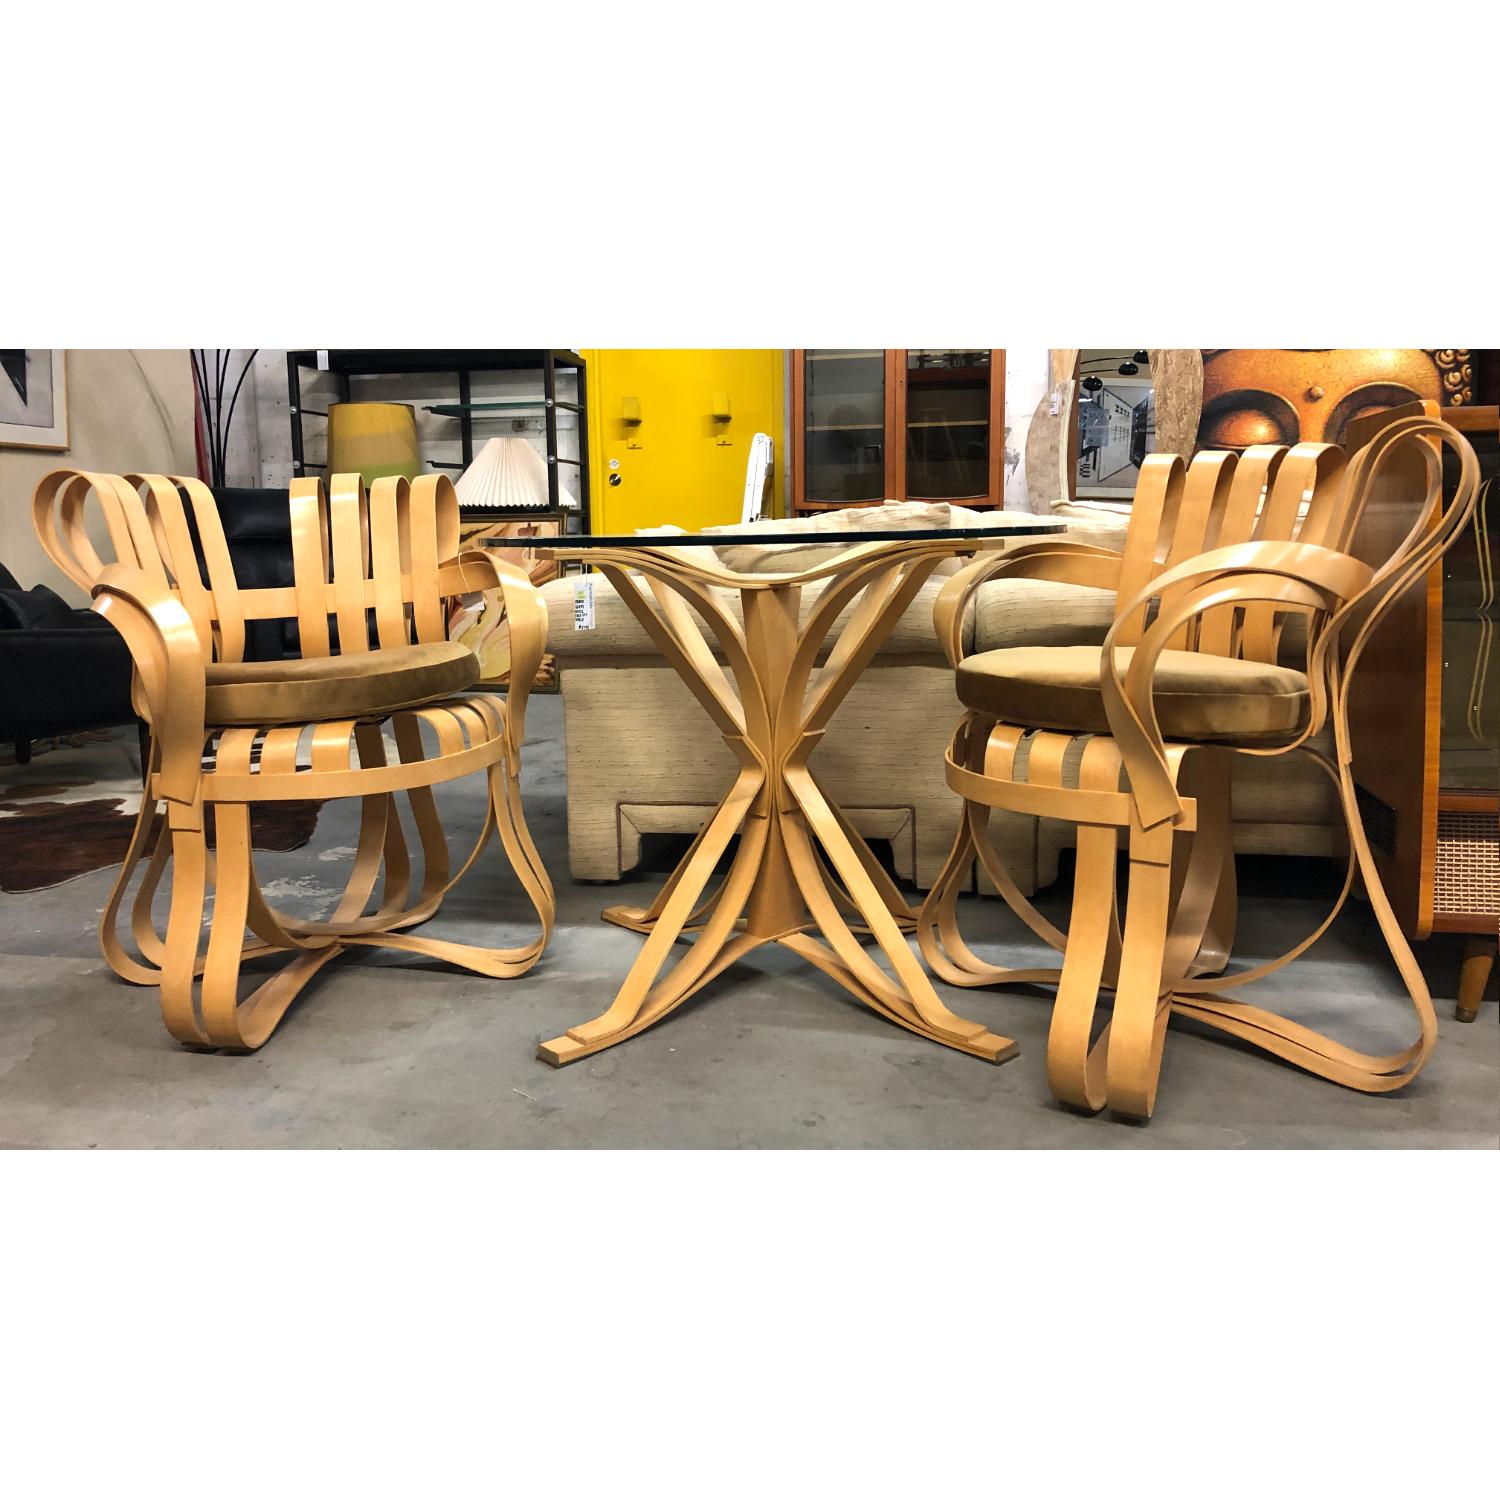 Late 20th Century Pair of Frank Gehry for Knoll Cross Check Chairs